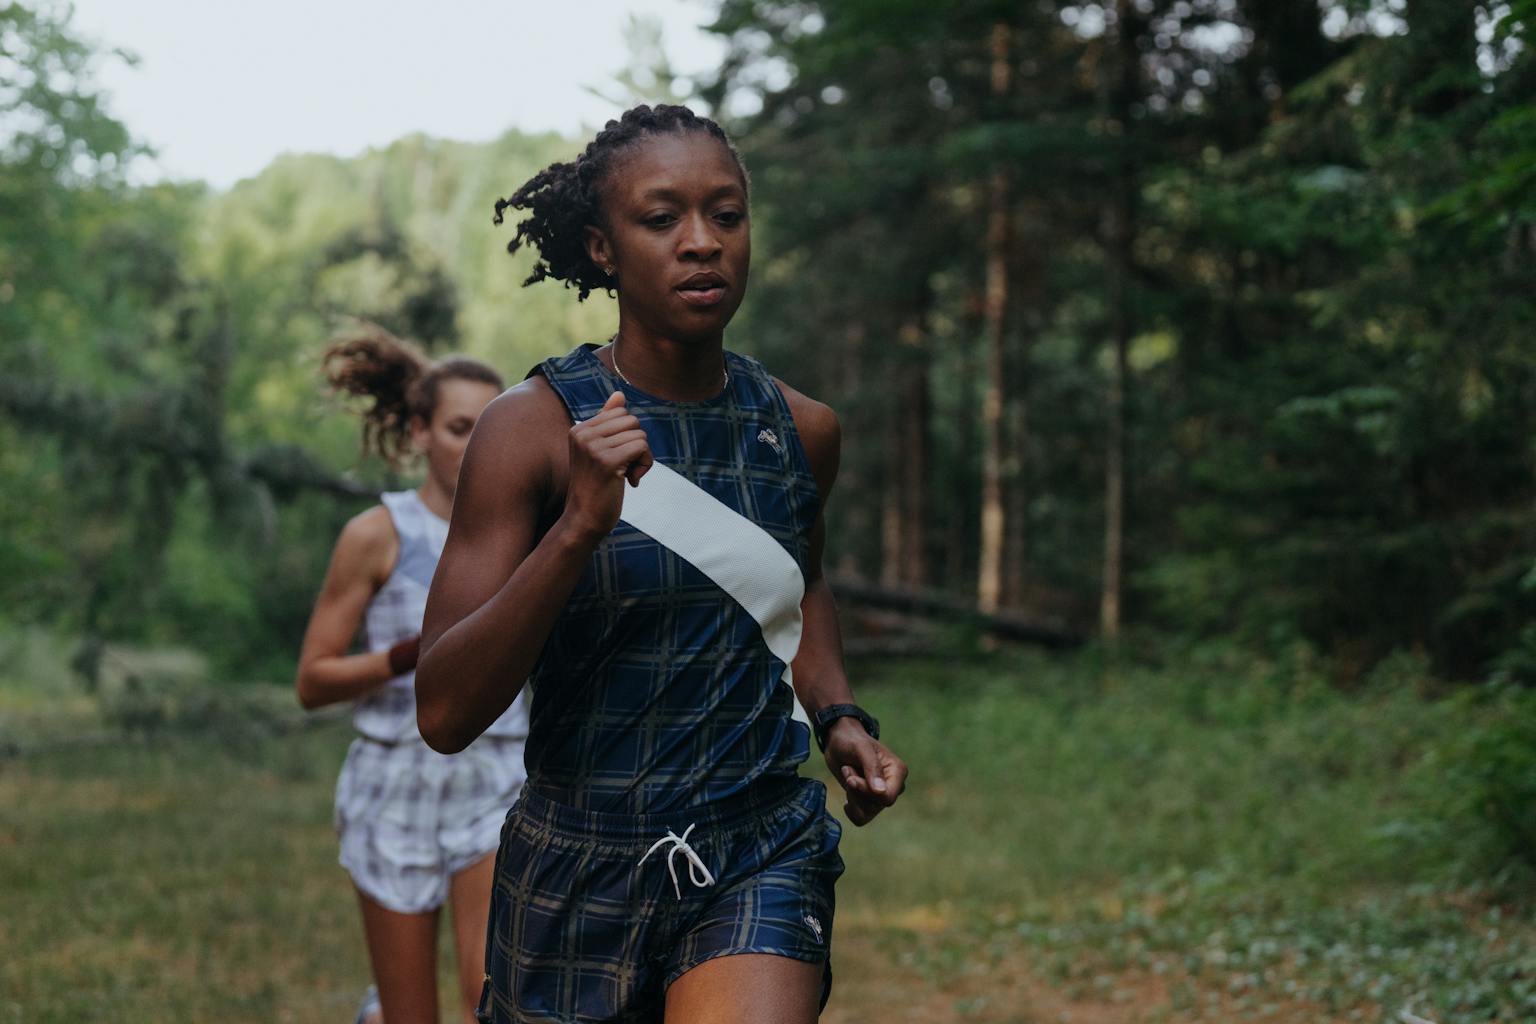 Where are all the female coaches? | Tracksmith